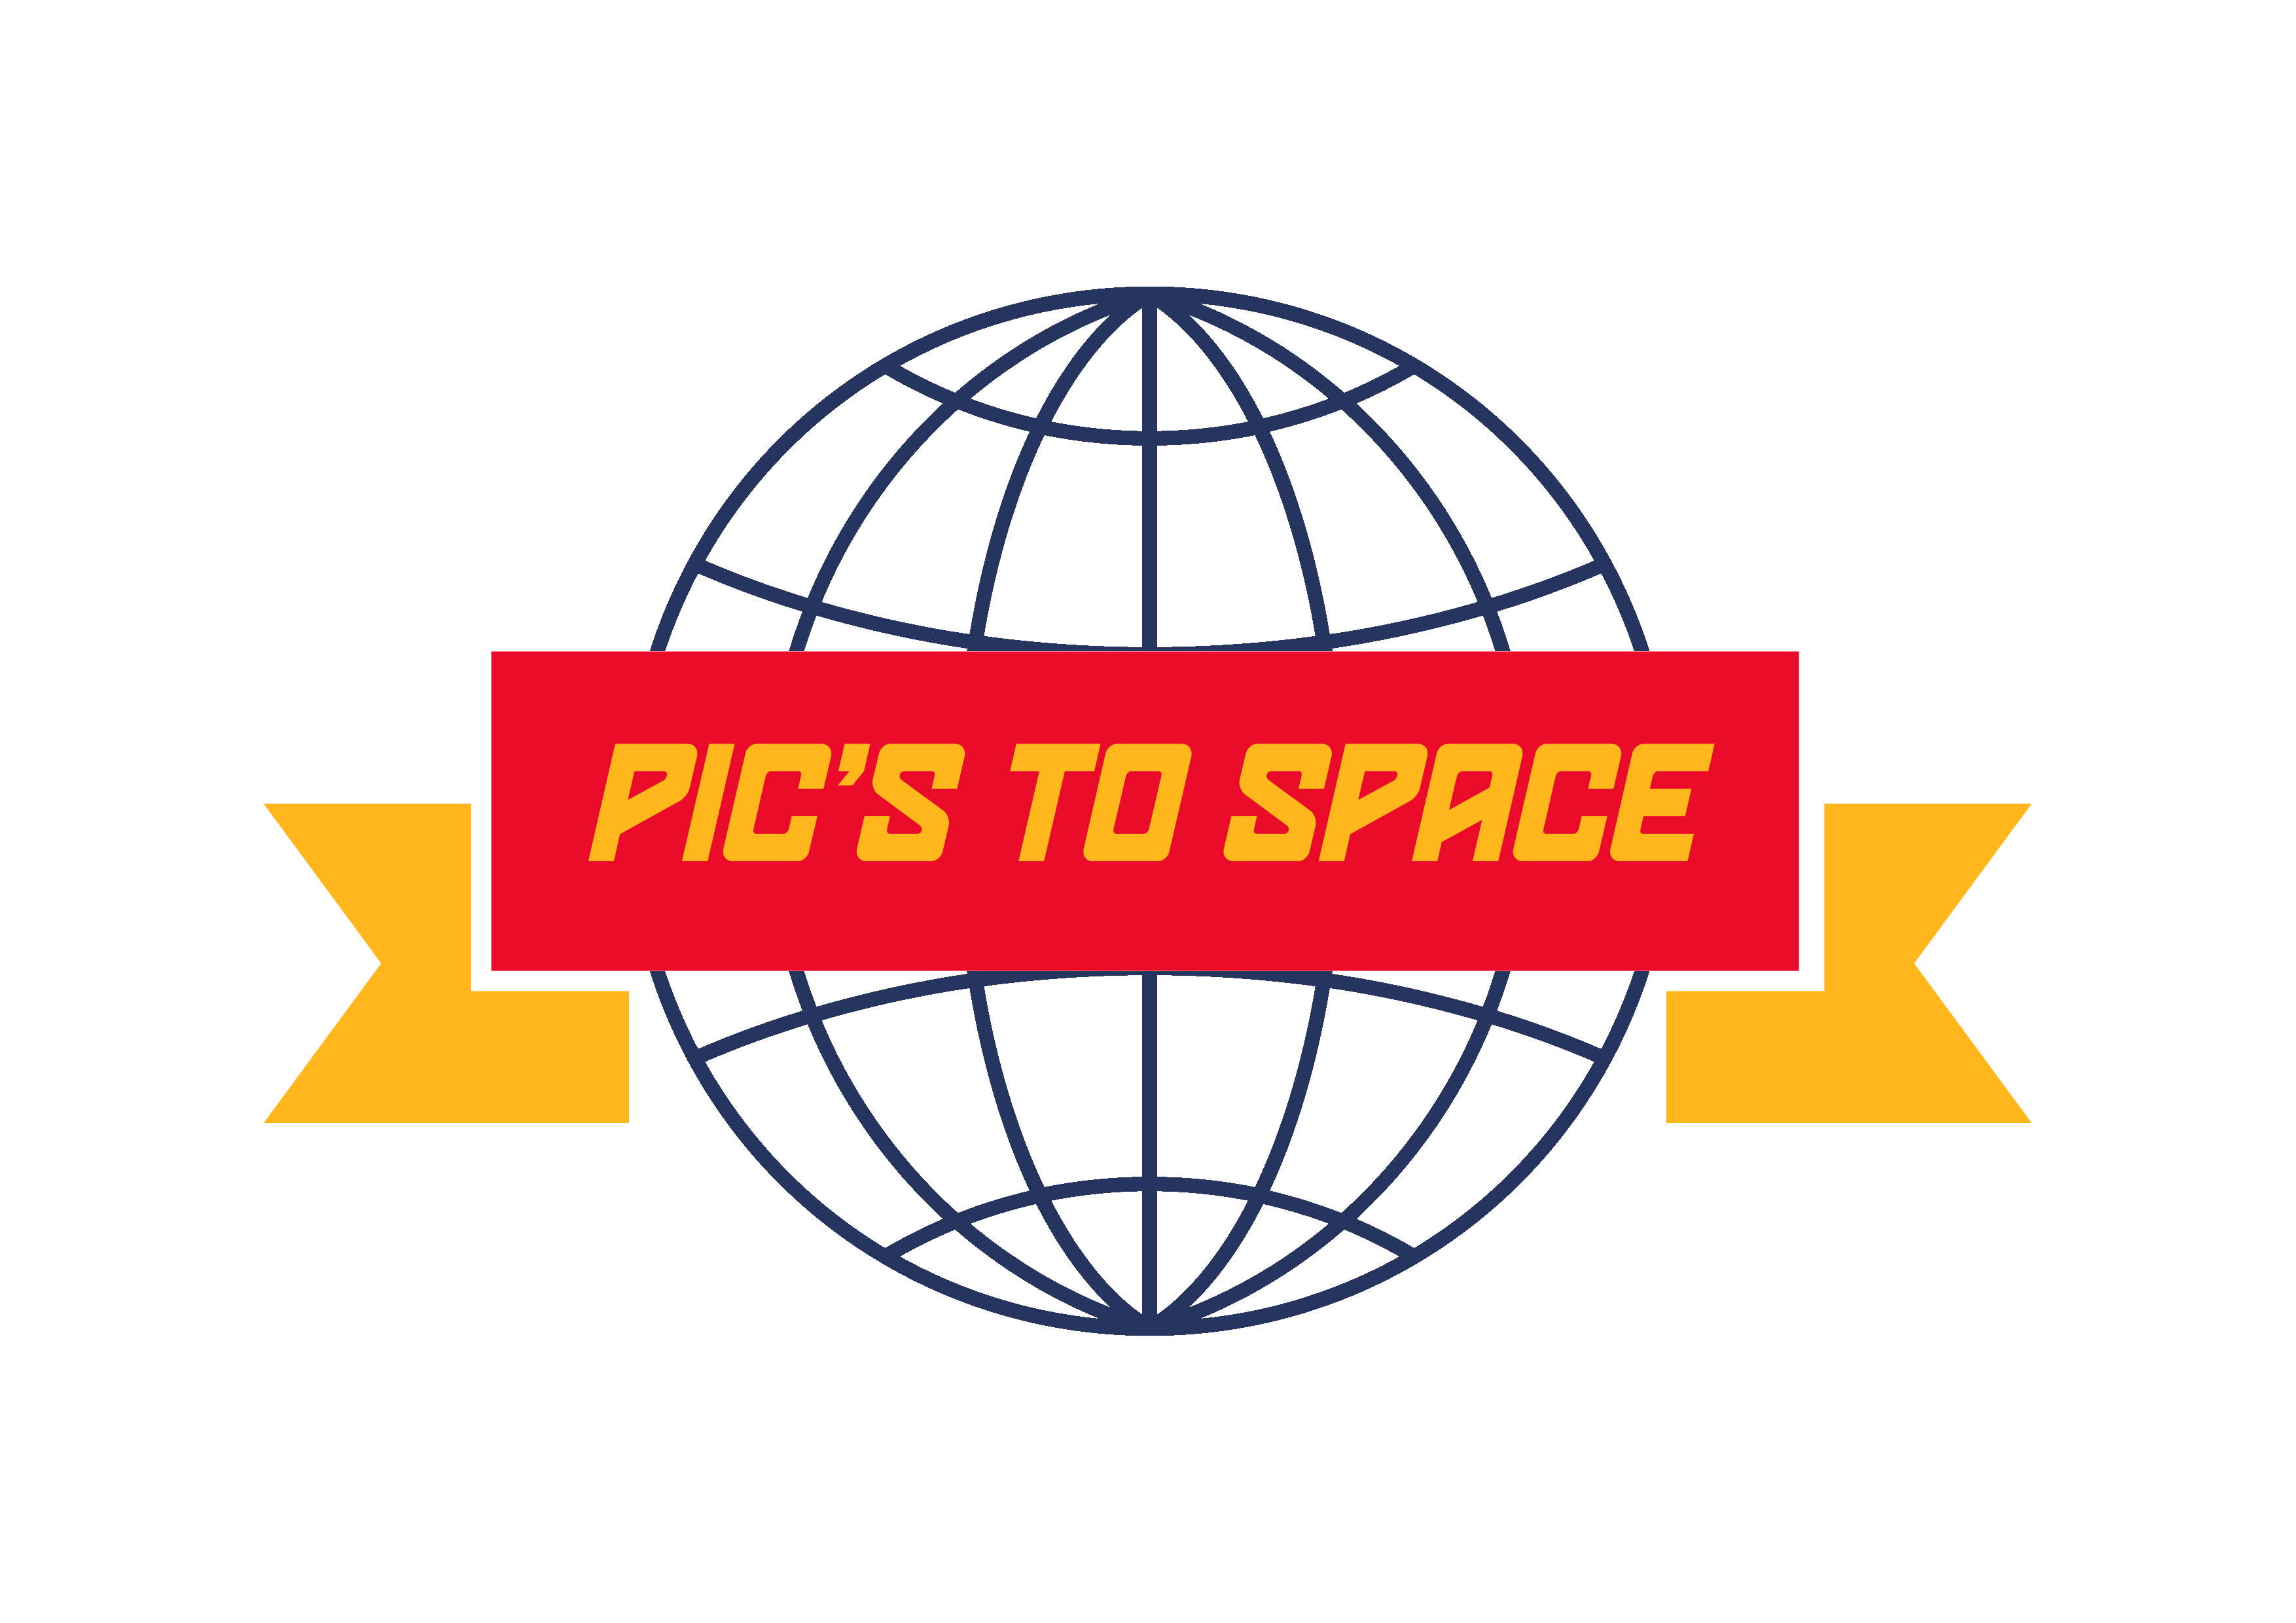 Pics to space the LOGO with Blue